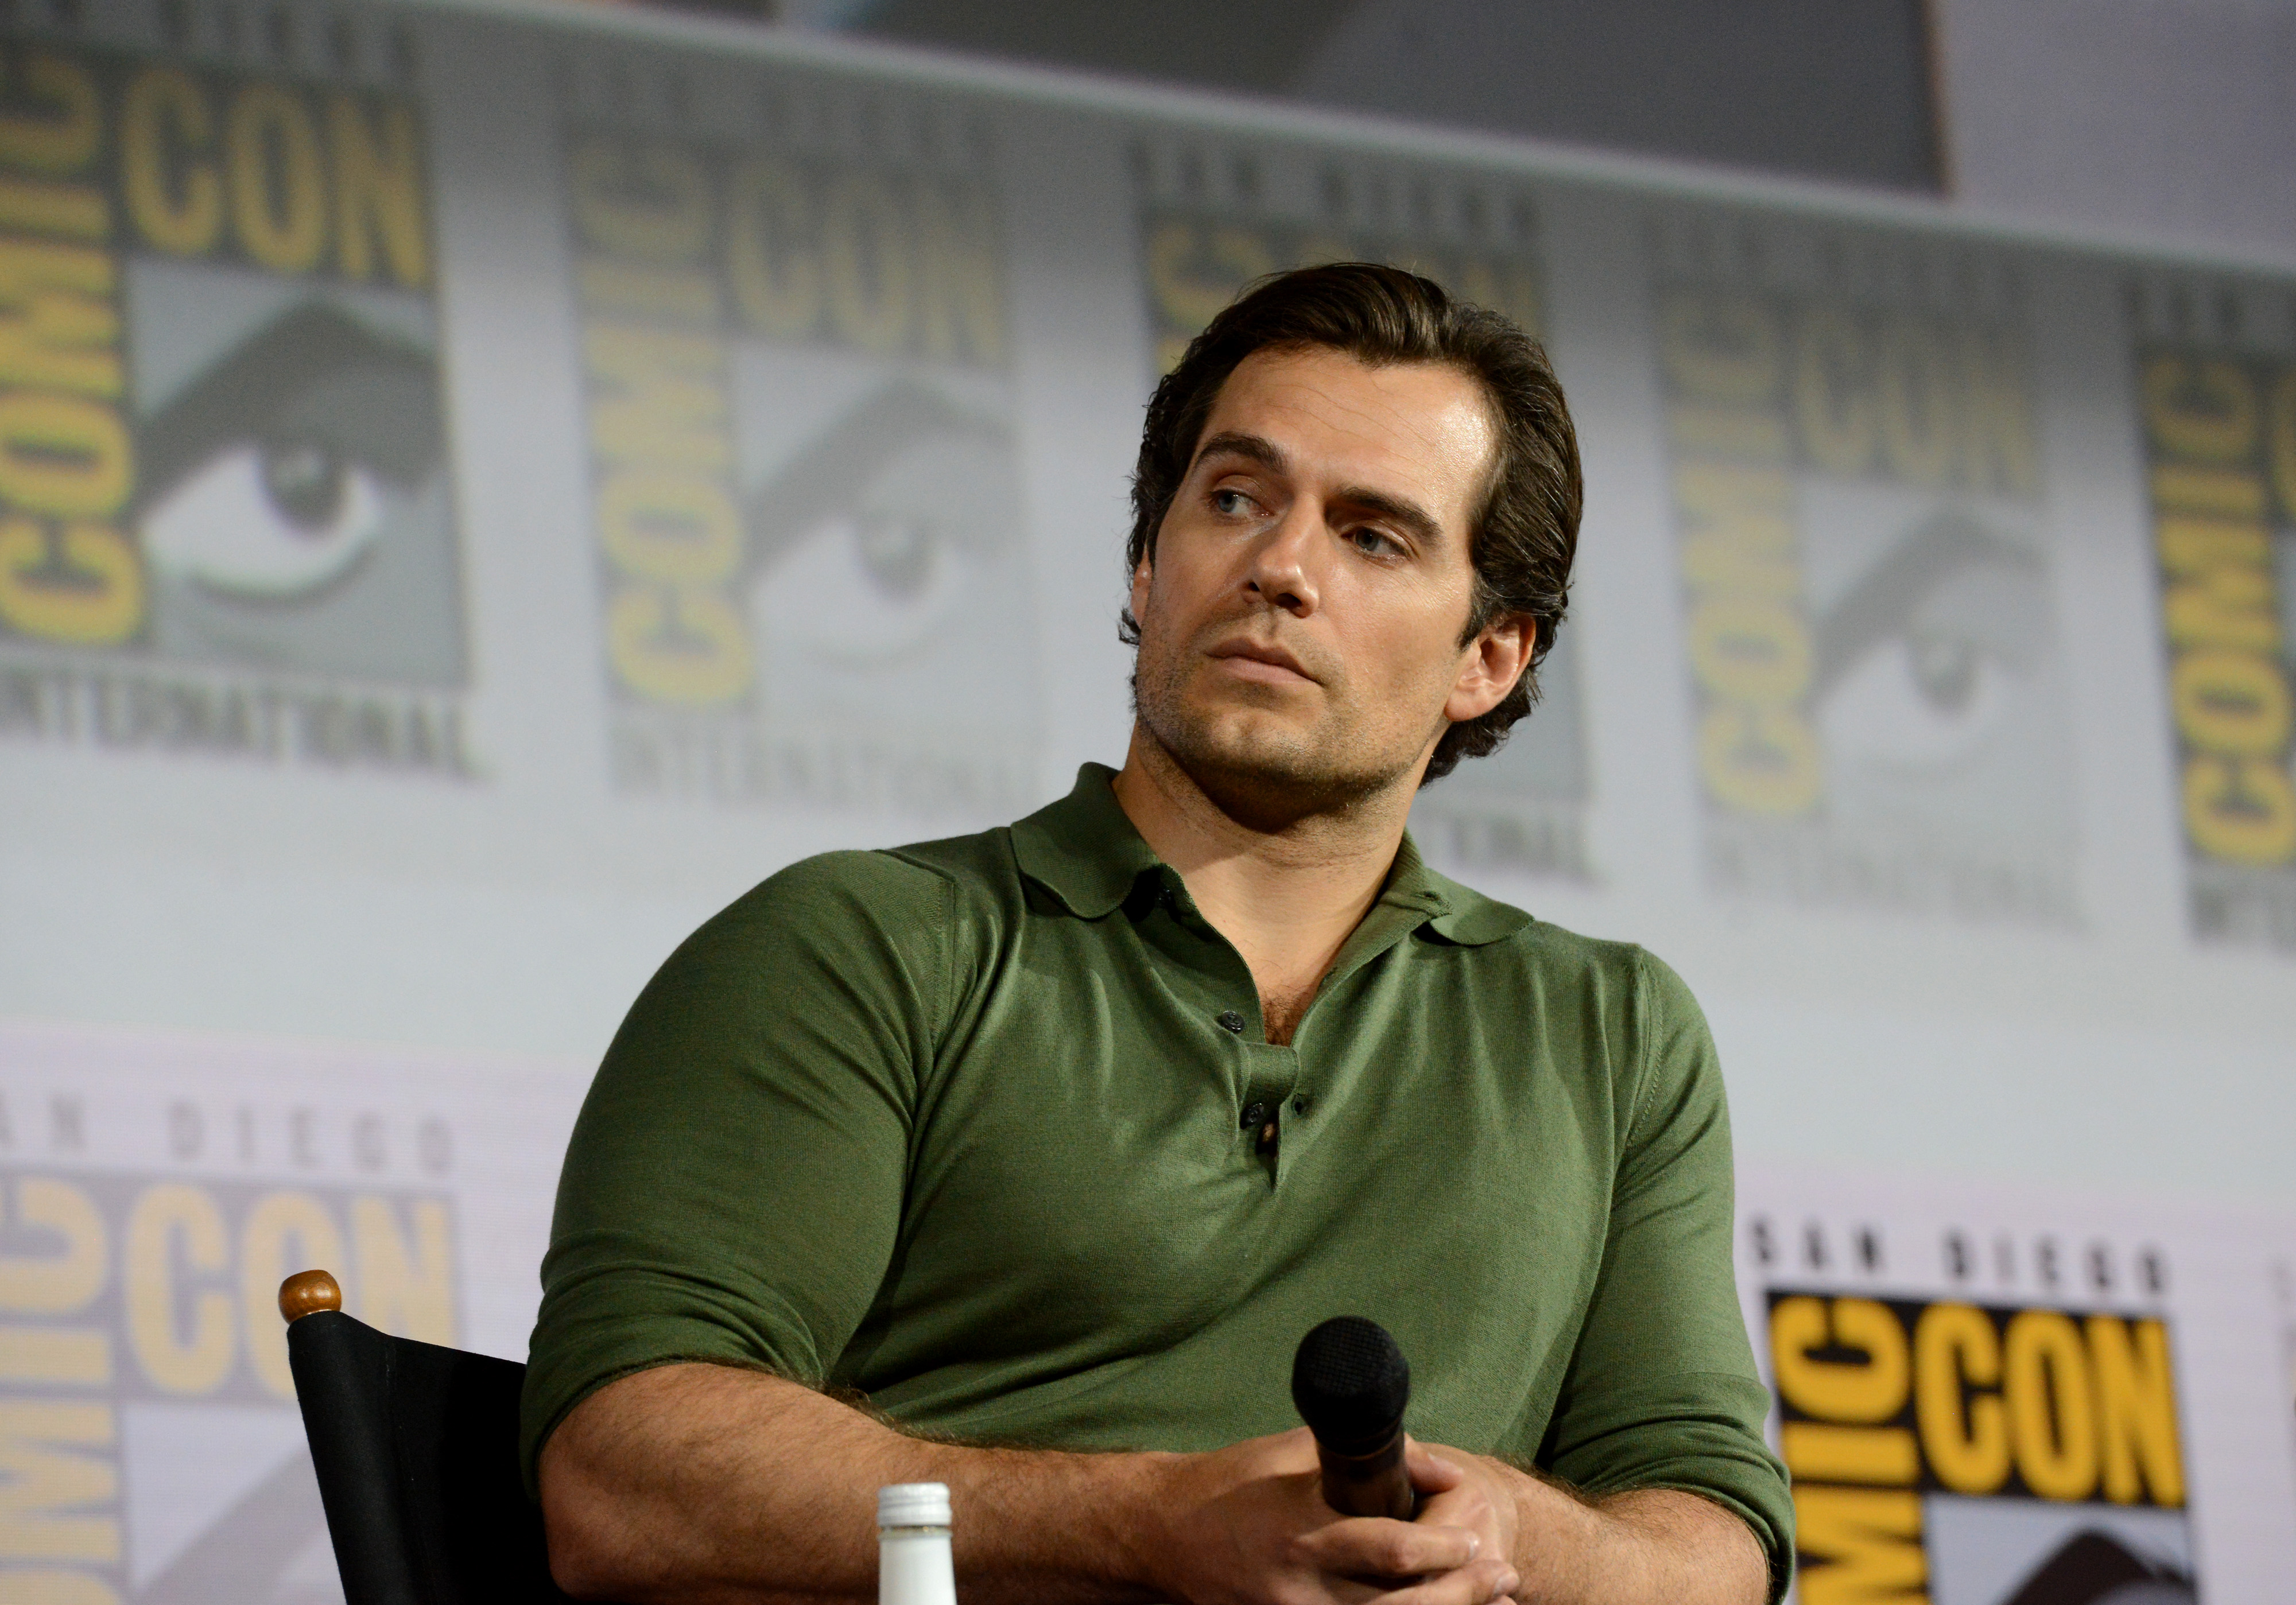 Henry Cavill attends "The Witcher": A Netflix Original Series Panel during 2019 Comic-Con International at San Diego Convention Center on July 19, 2019 in San Diego, California | Source: Getty Images